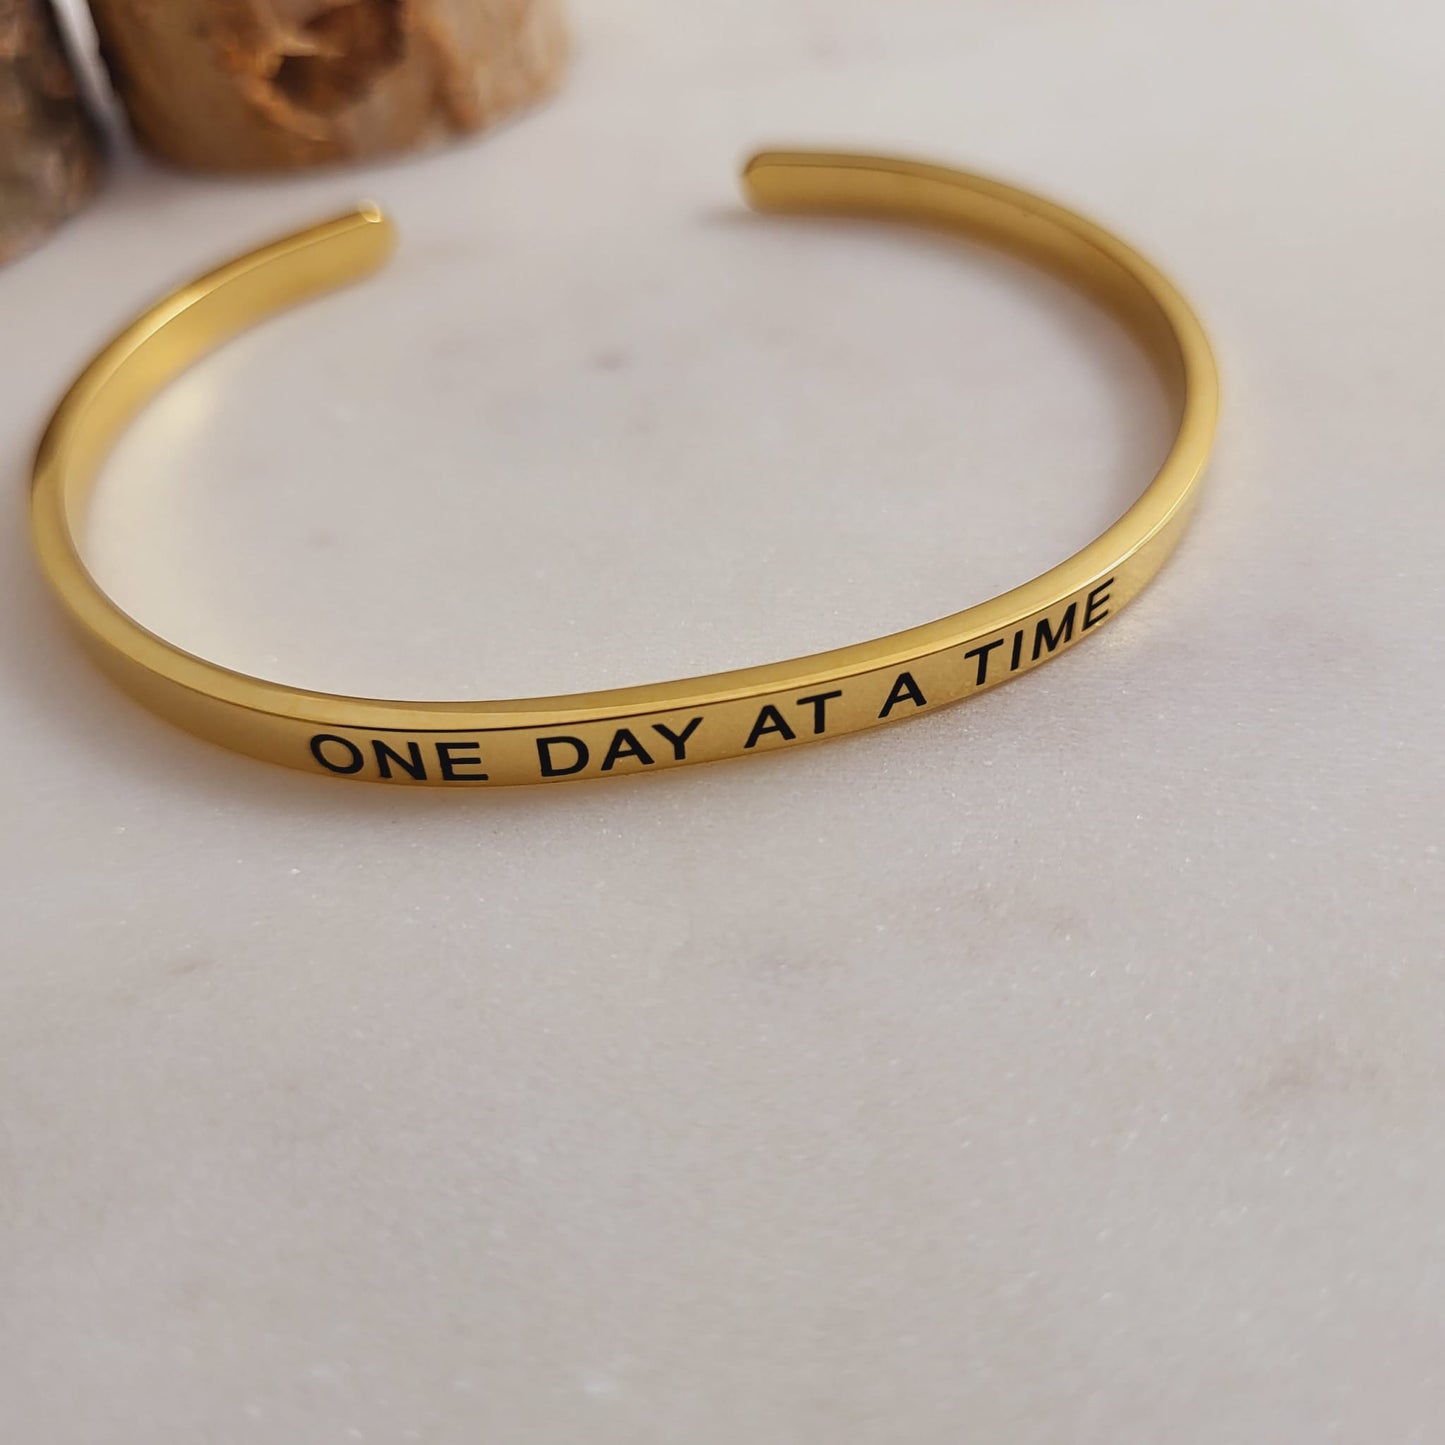 Wear Your Motivation - One day At a Time Bracelets